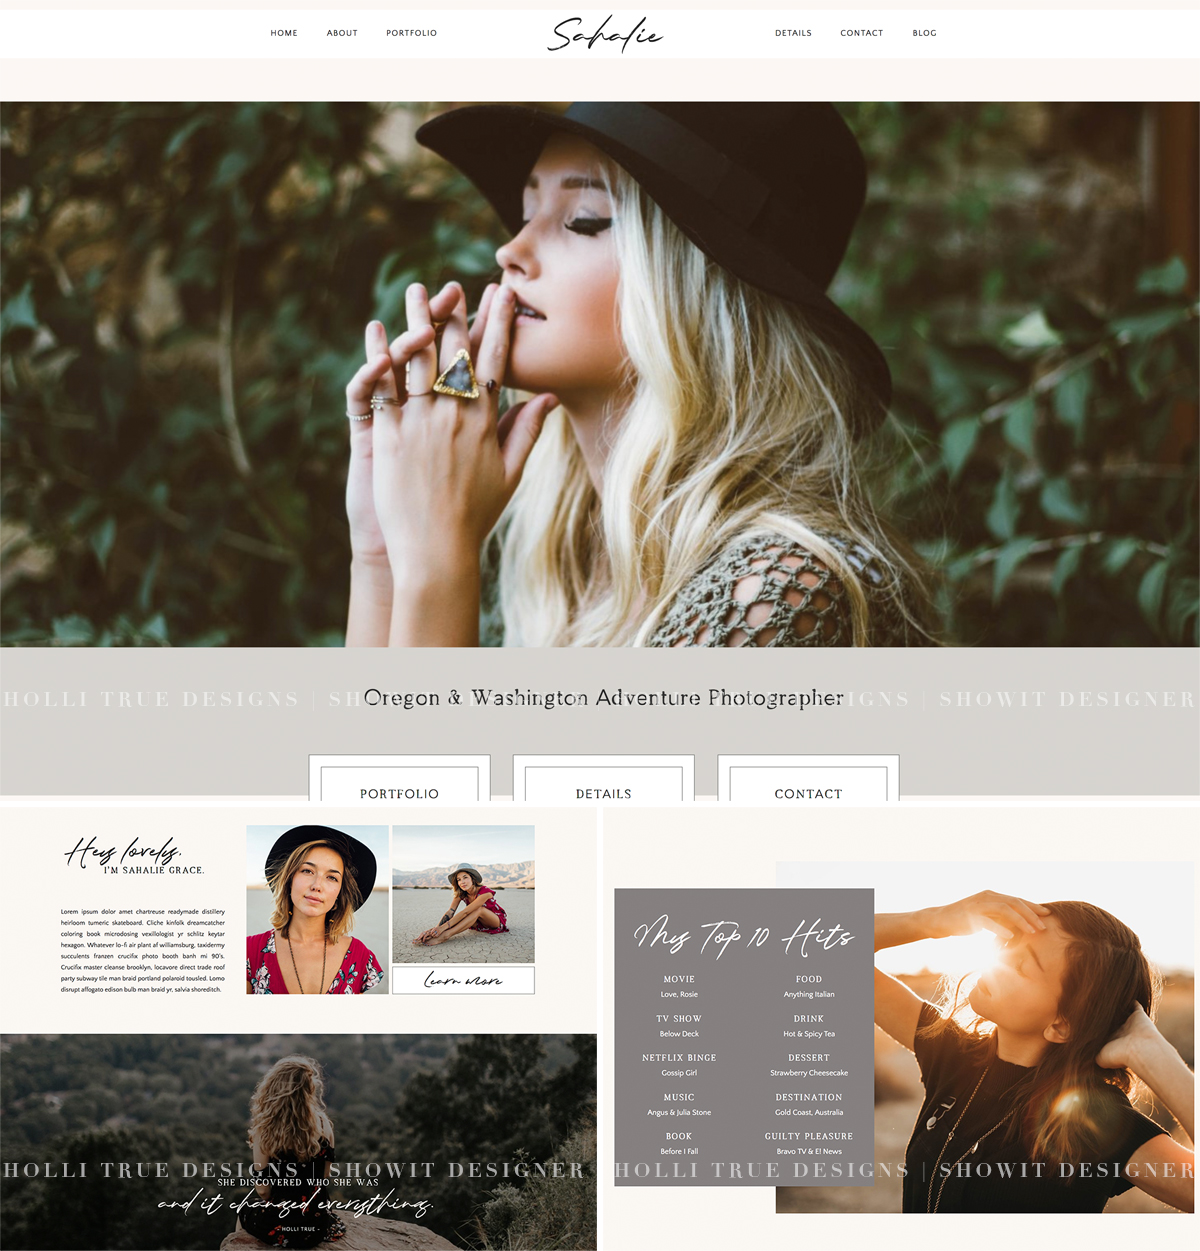 Sahalie is a Showit Website Template for Photographers that converts! Strategically designed with a beautiful layout for photographers by Holli True Designs.